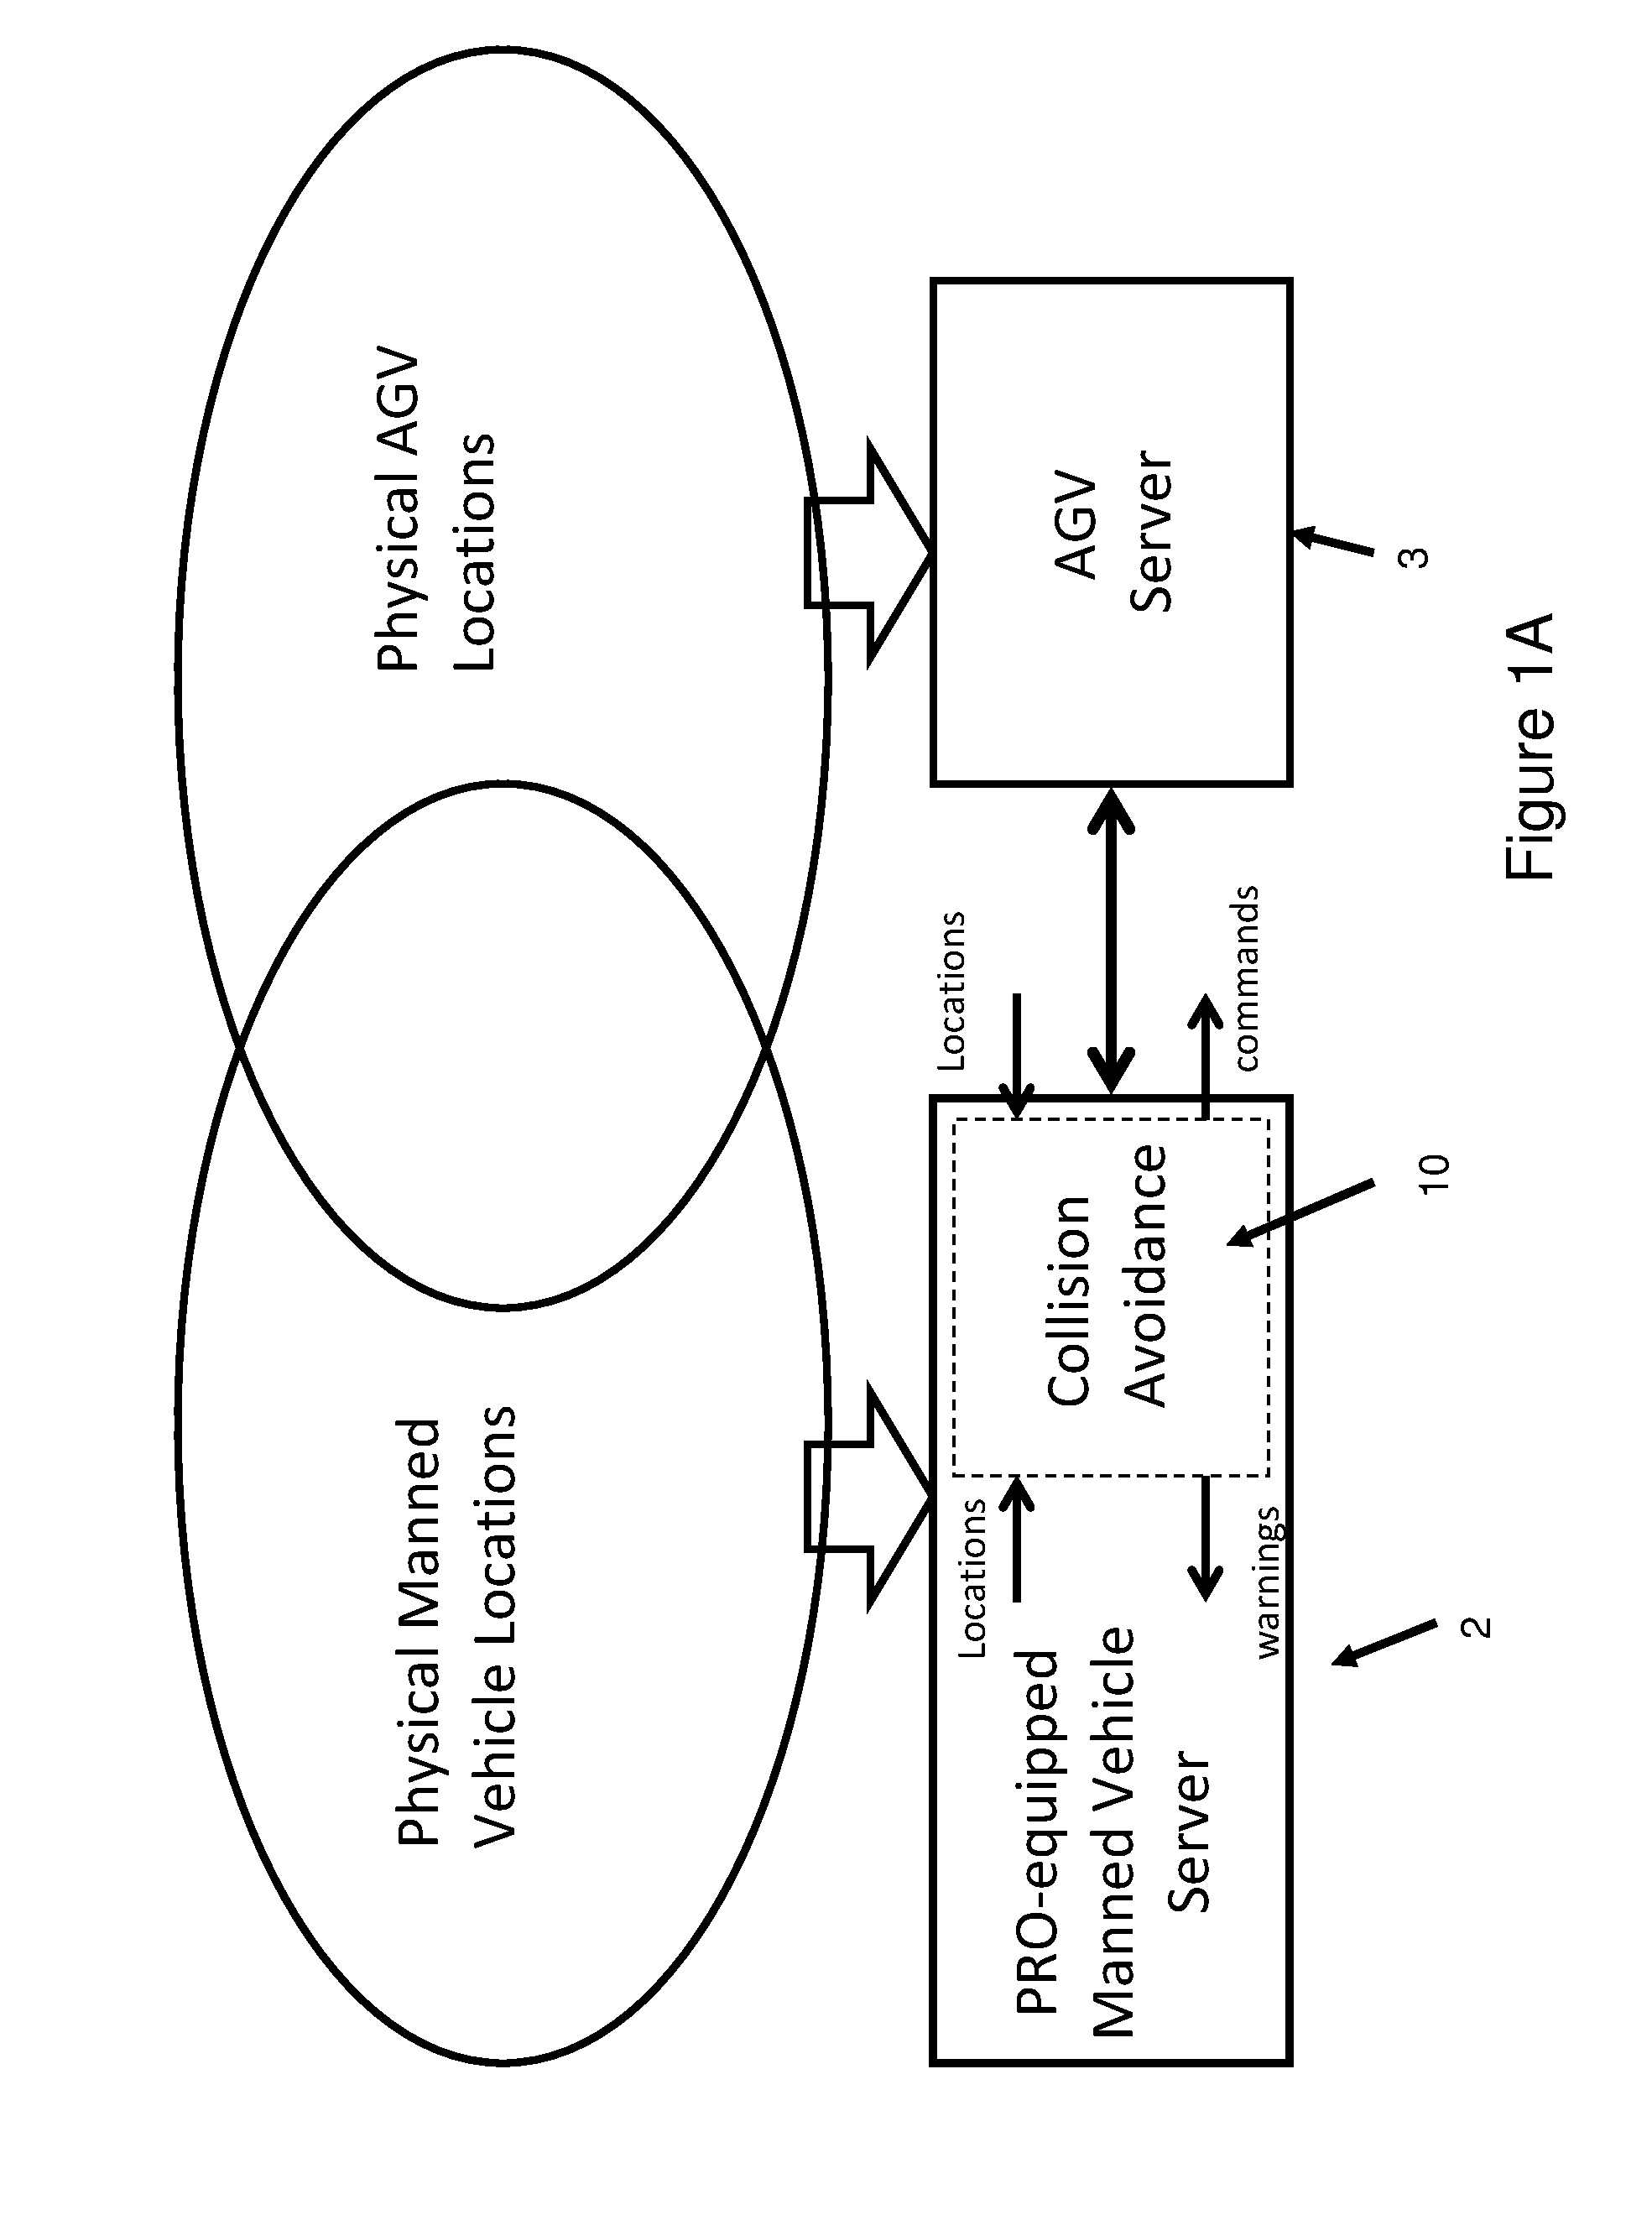 Method and apparatus for collision avoidance